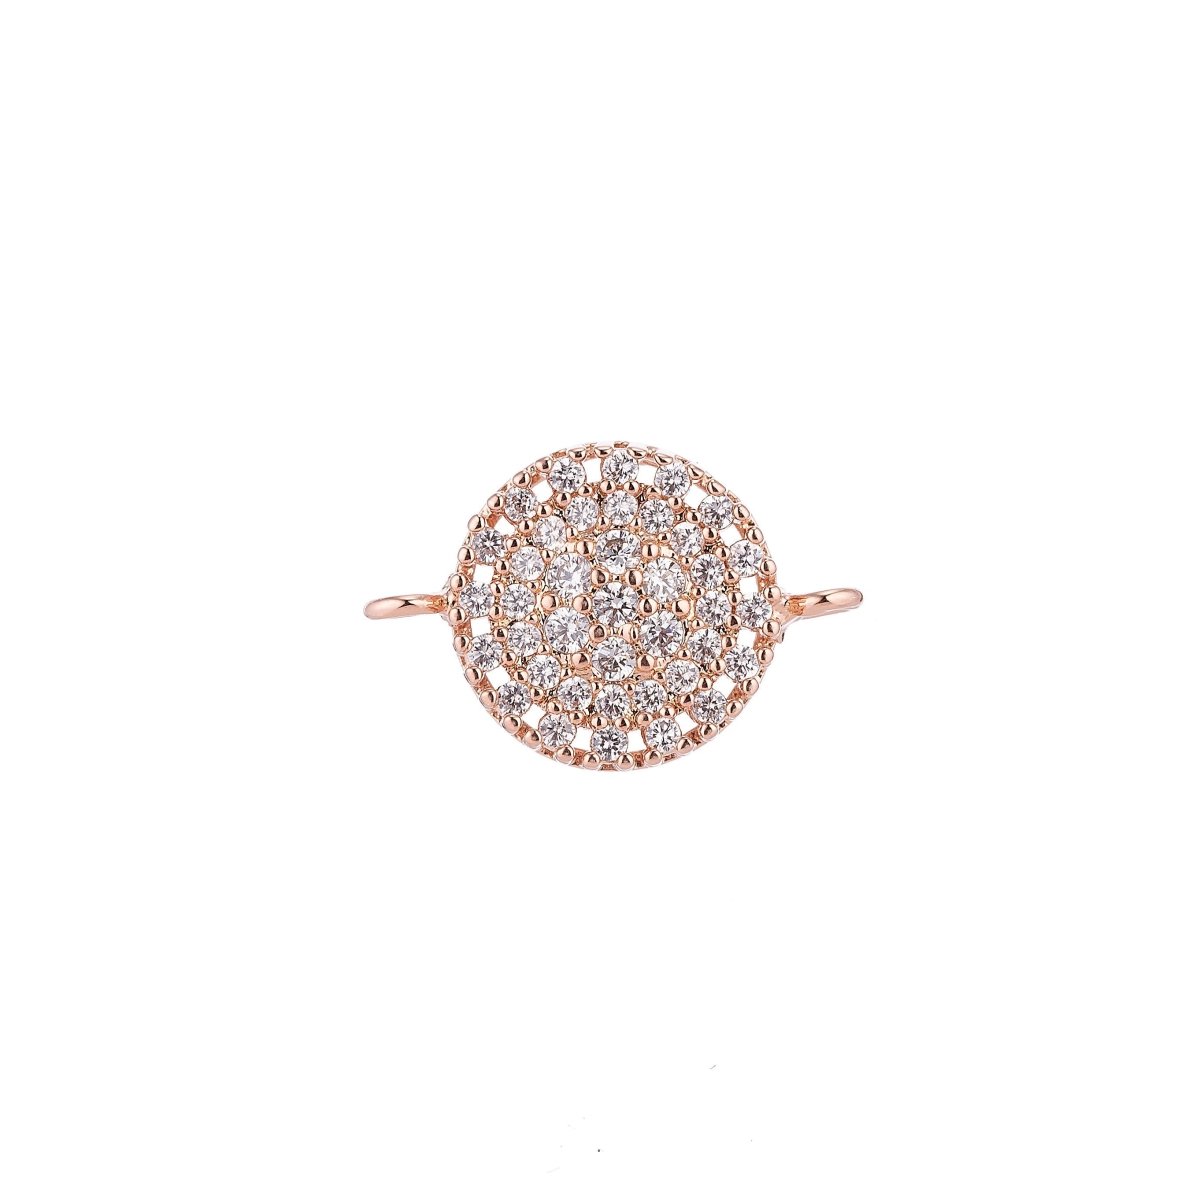 On Sale! CLEARANCE! 18K Gold Filled, White Gold Filled, Rose Gold Filled, Gun-Metal Plated Minimalist Simple Charming Crystal in Circle Cubic Zirconia Charm CONNECTOR For Jewelry Making Finding | F-034 - DLUXCA